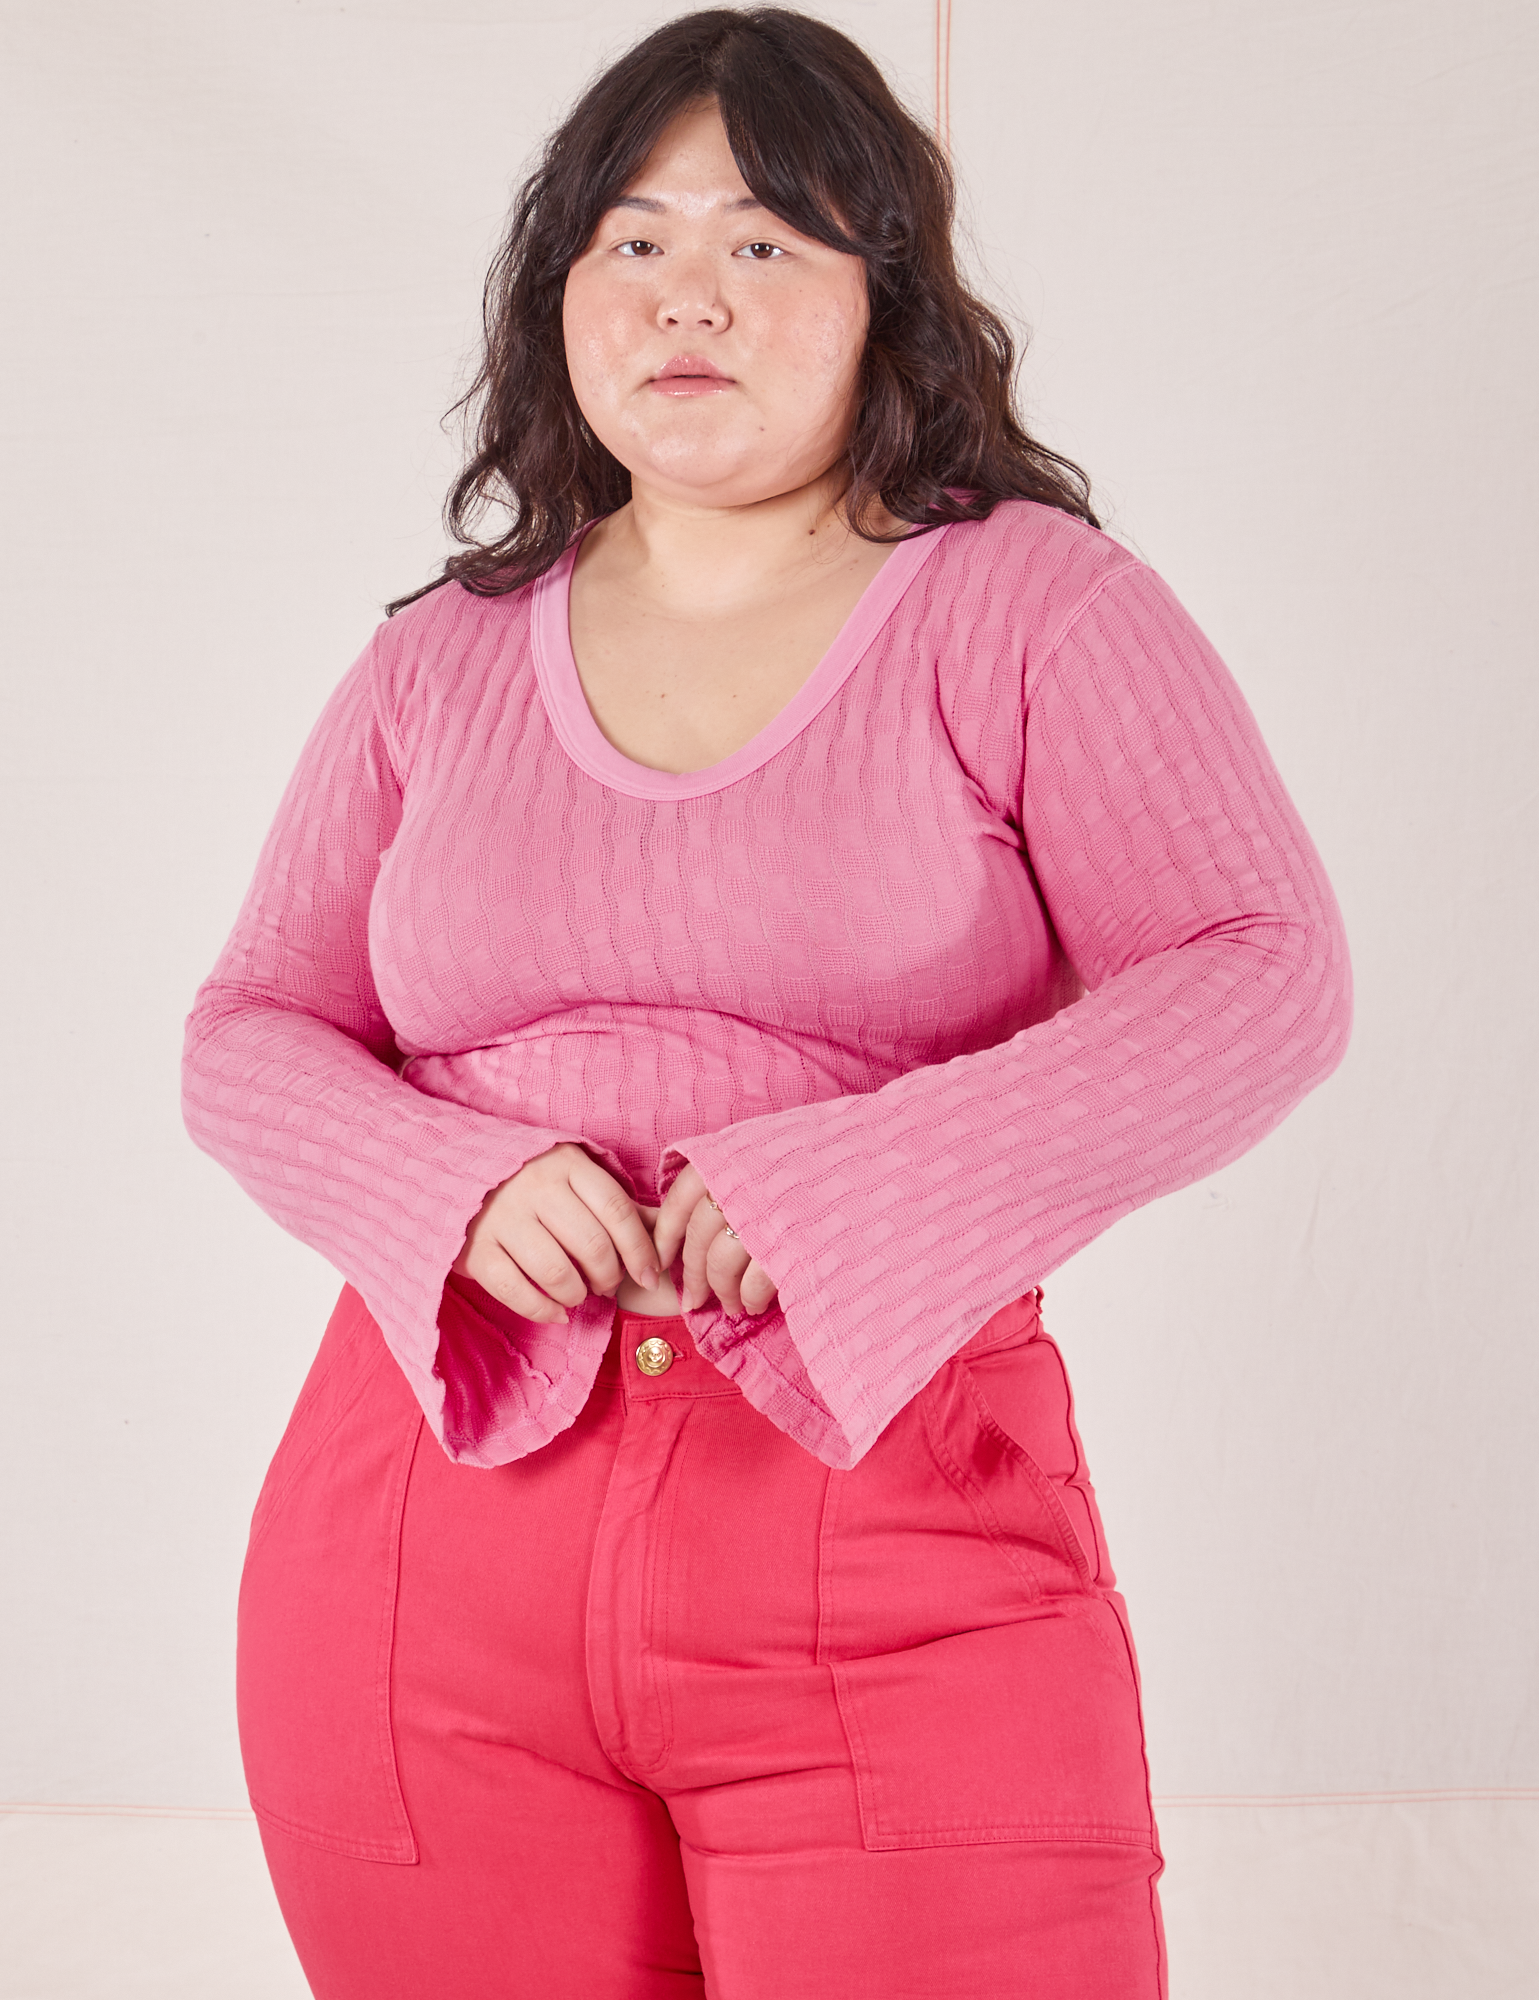 Ashley is wearing L Bell Sleeve Top in Bubblegum Pink paired with hot pink Work Pants